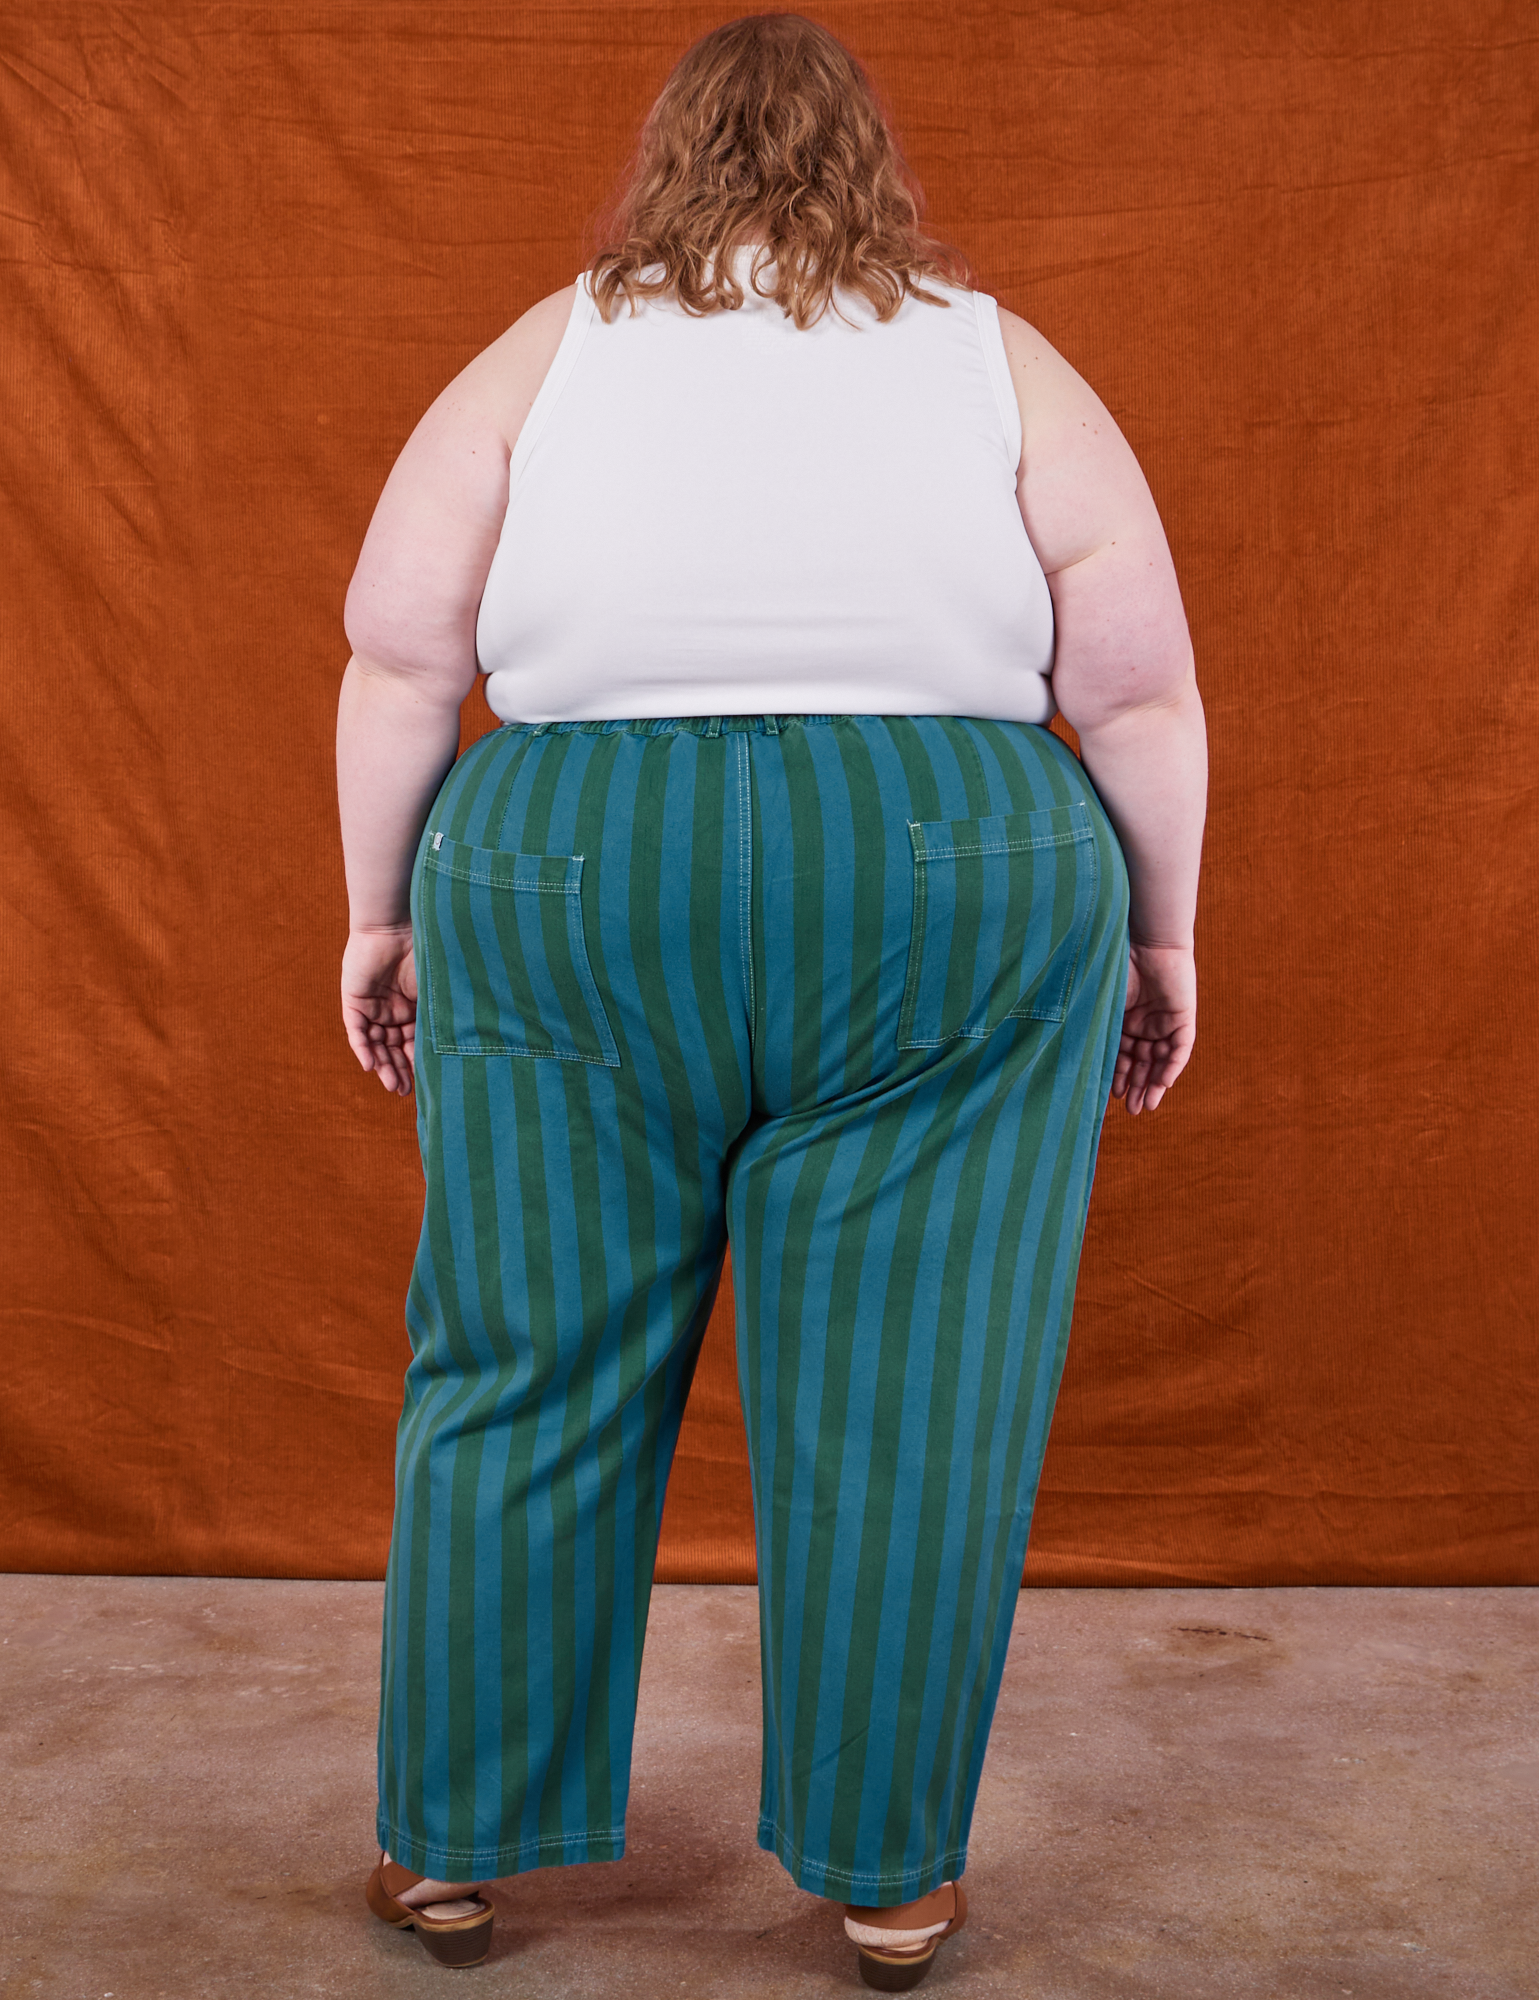 Back view of Overdye Stripe Work Pants in Blue/Green and vintage off-white Cropped Tank Top on Catie